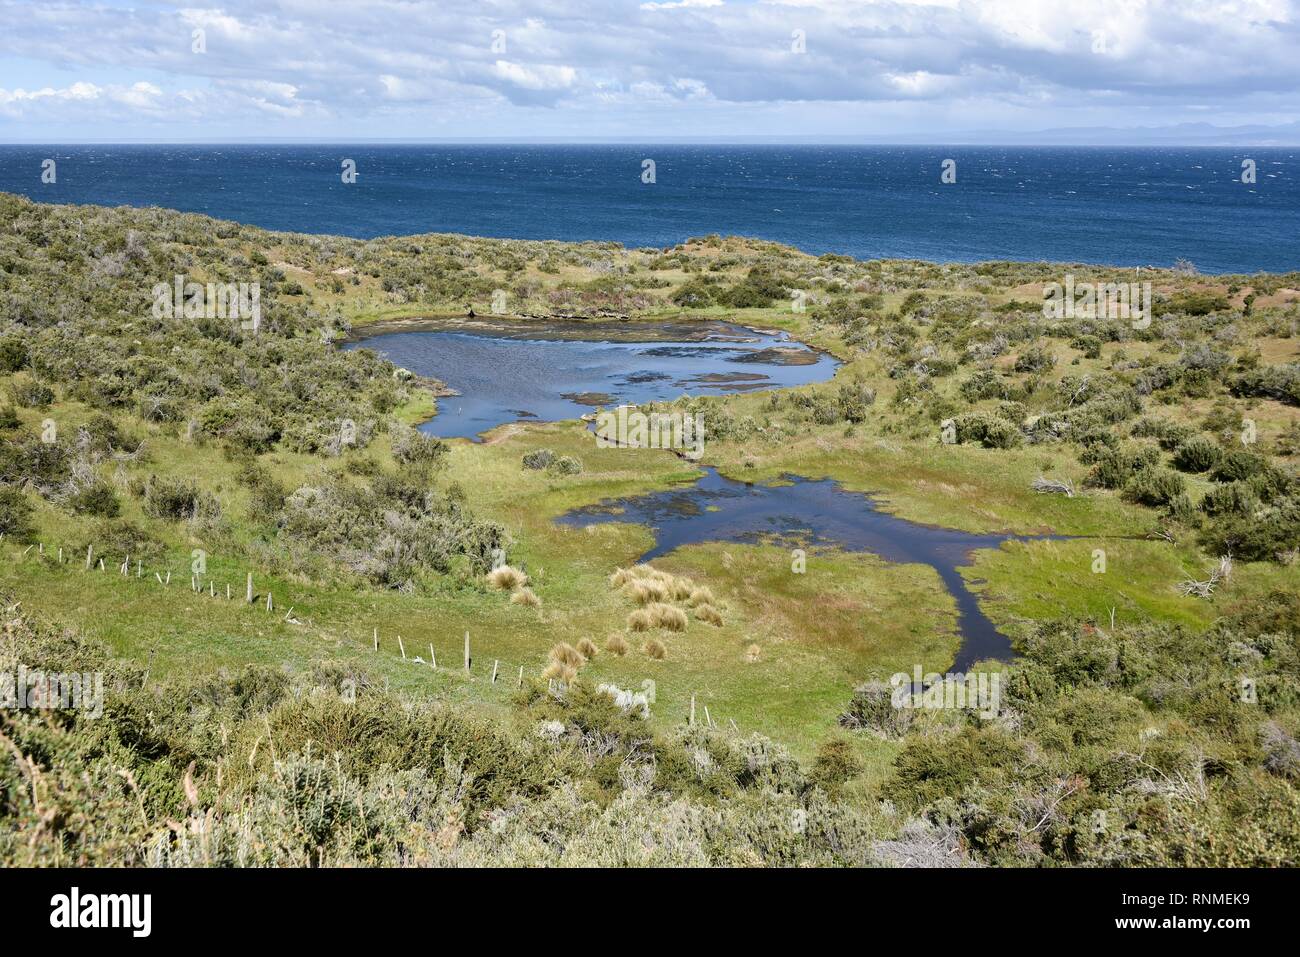 Coast of the Strait of Magellan between Porvinier and Punta Arenas, Patagonia, Chile Stock Photo